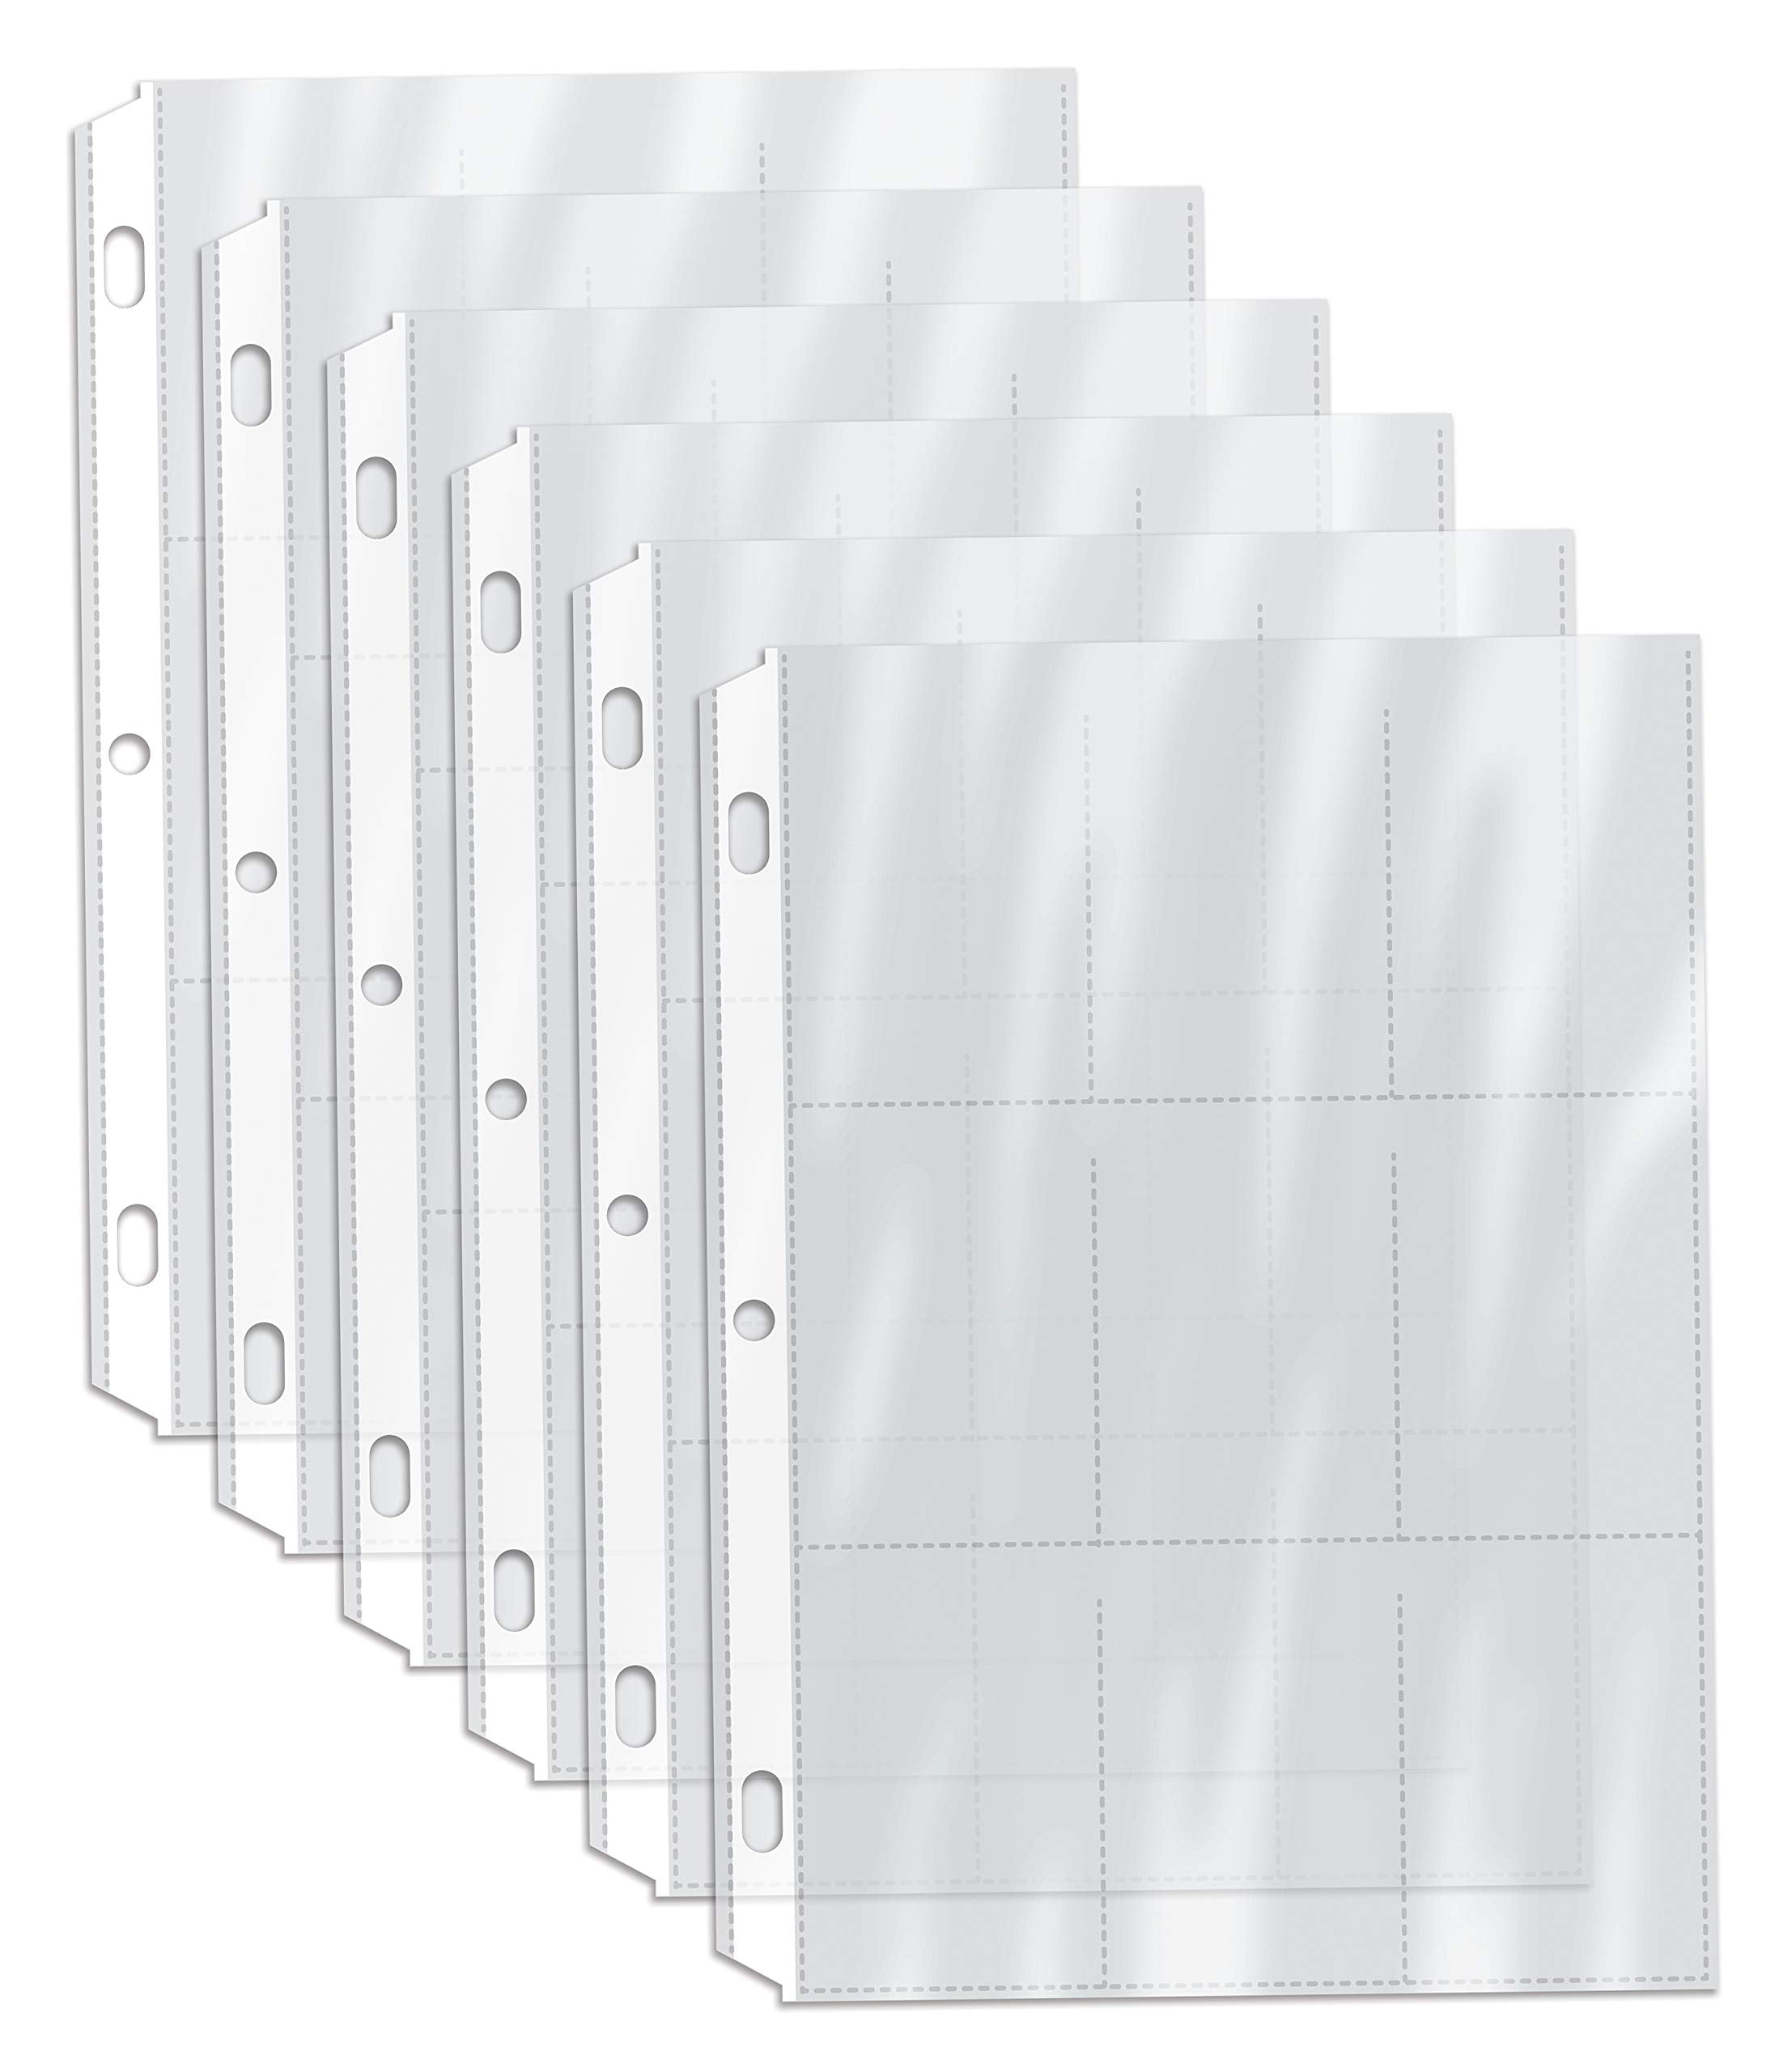  MaxGear 60 Pack Photo Sleeves for 3 Ring Binder 5x7